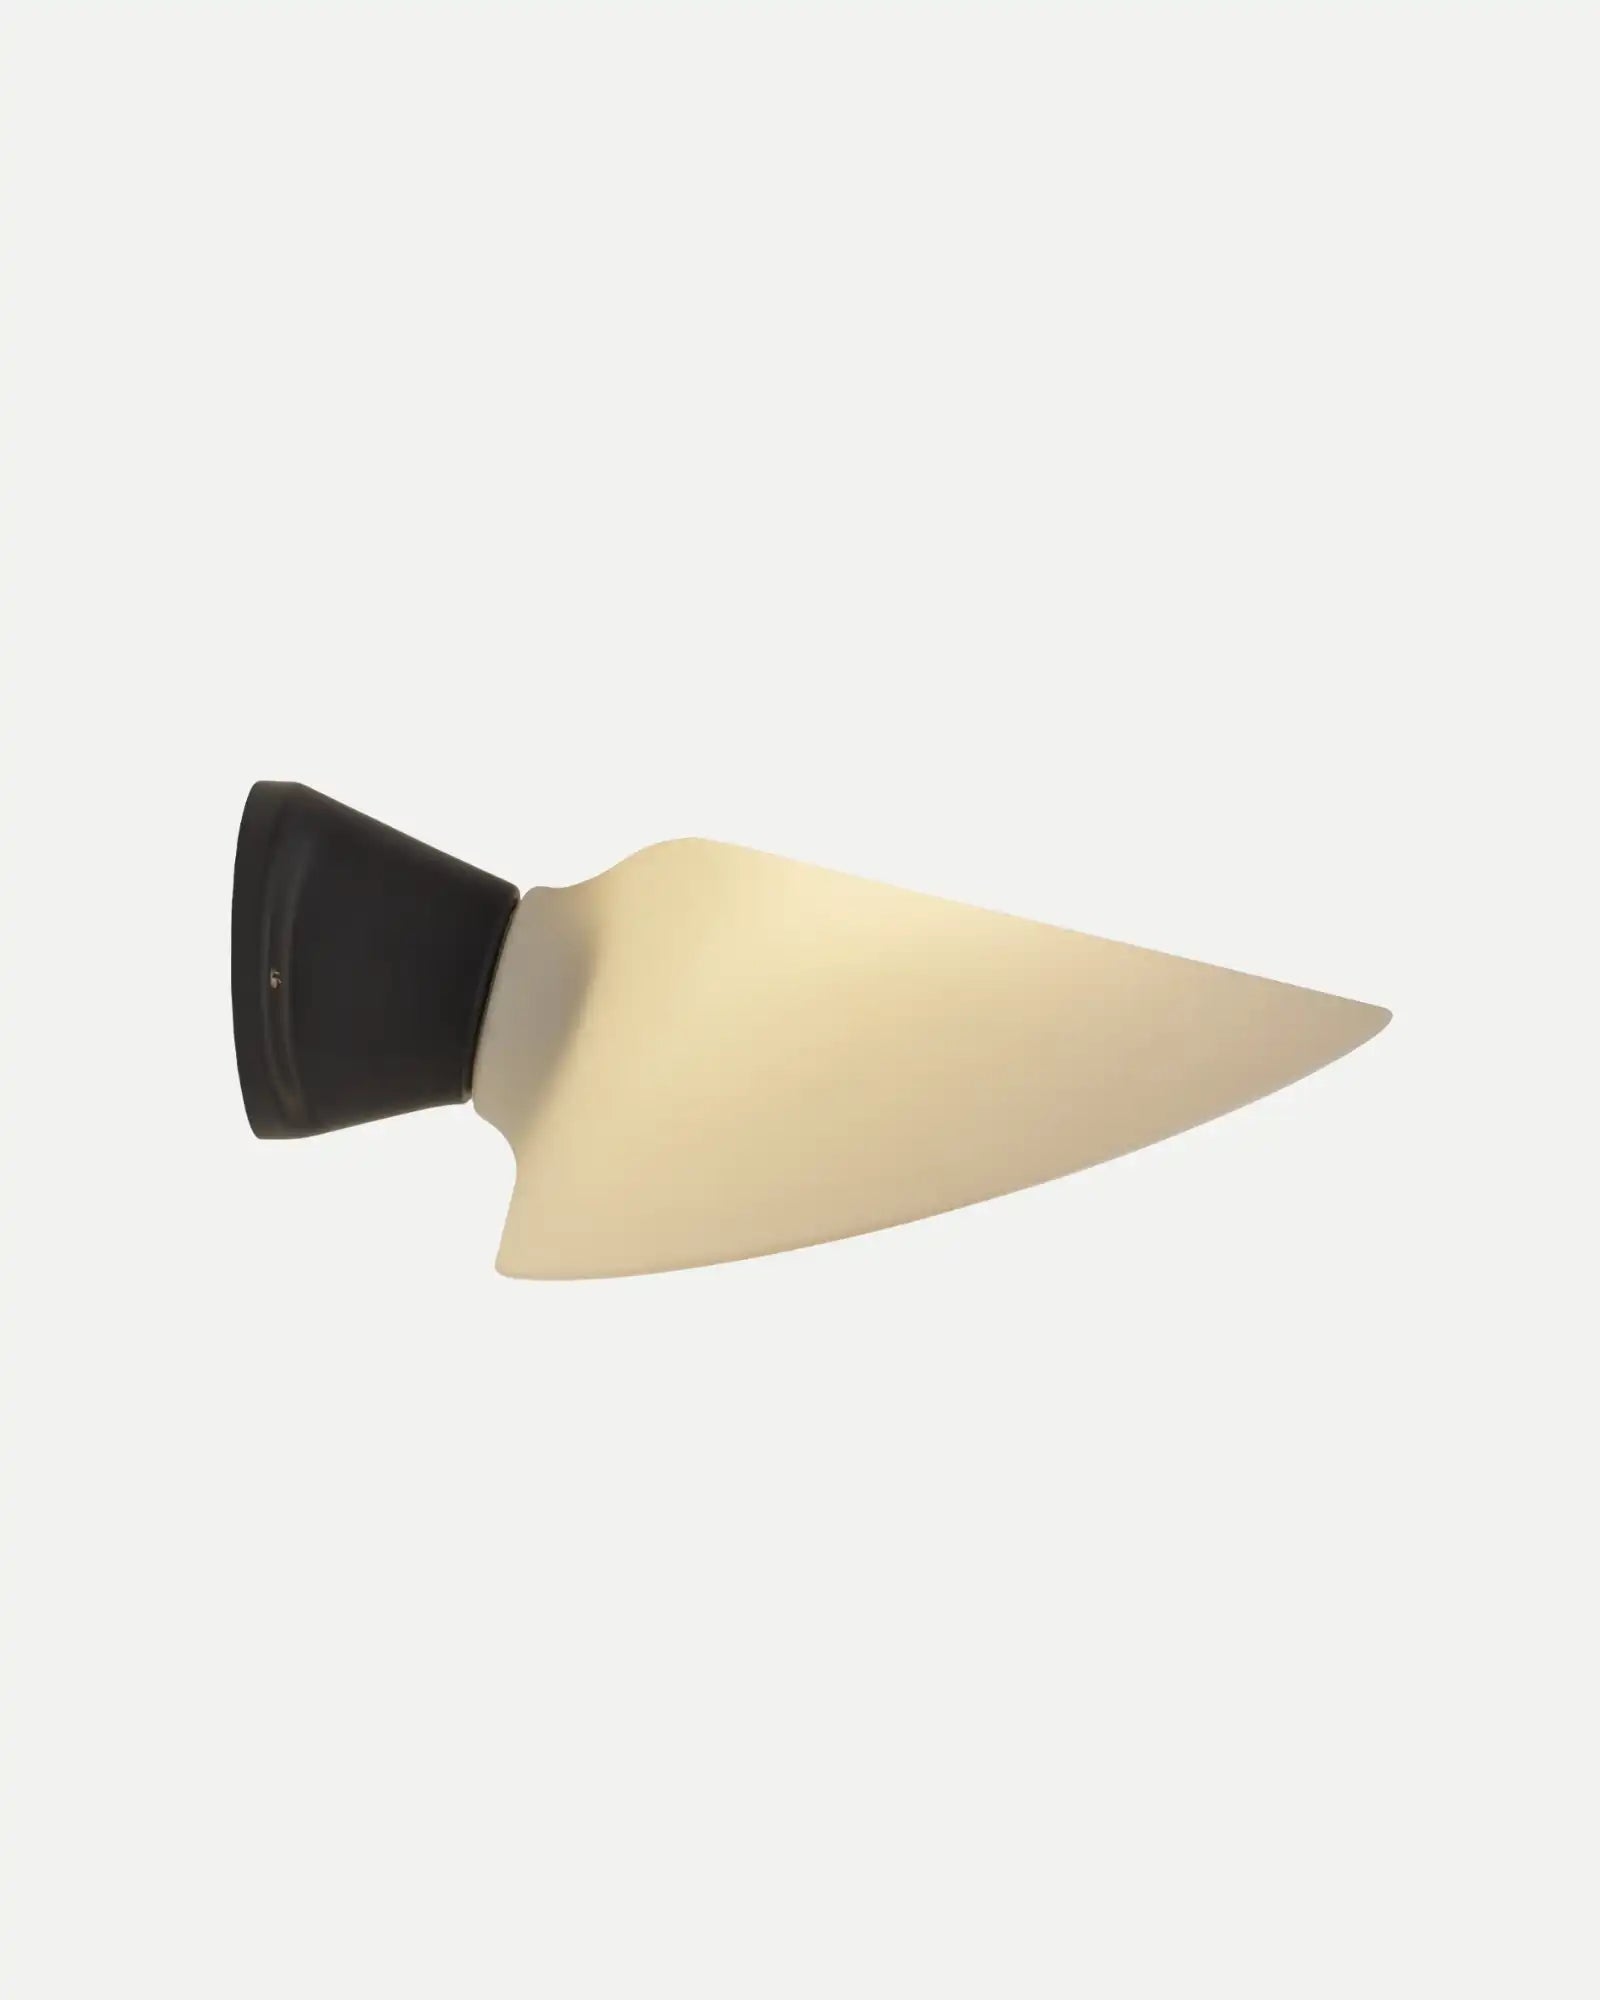 Plume Bathroom Wall Light by DCW Editions | Nook Collections